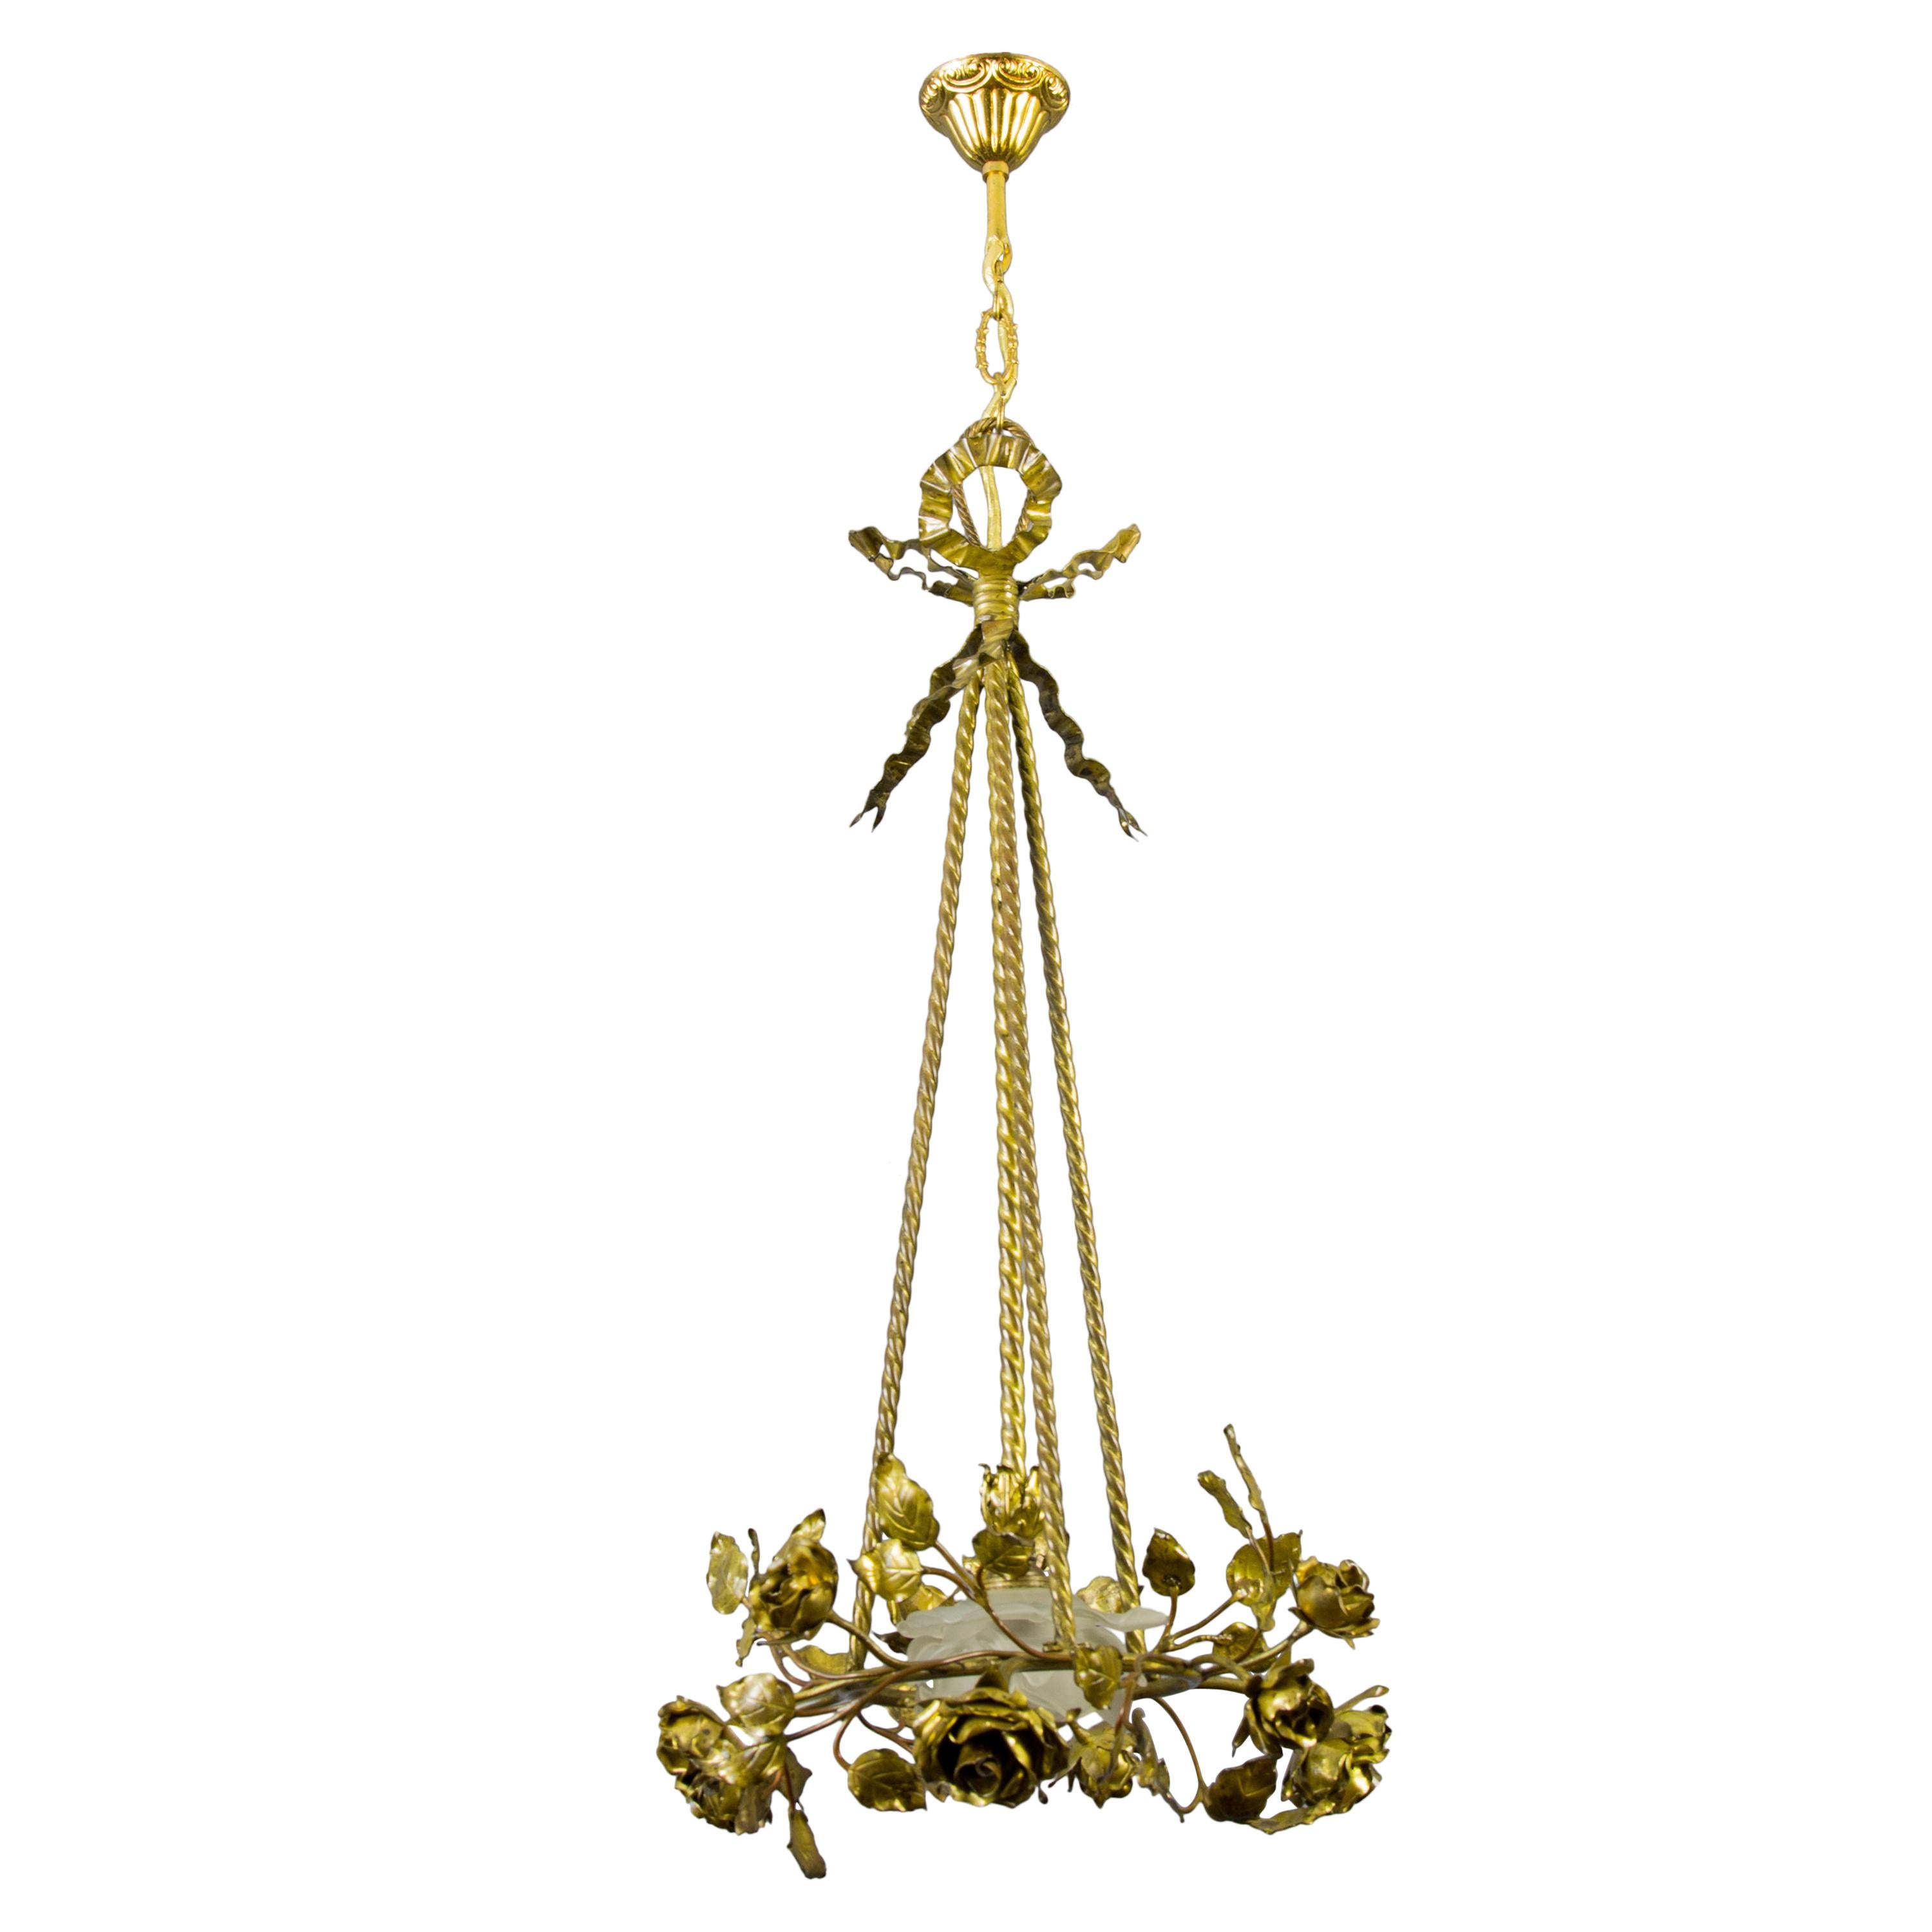 French Louis XVI Style Four-Light Bronze Roses Chandelier